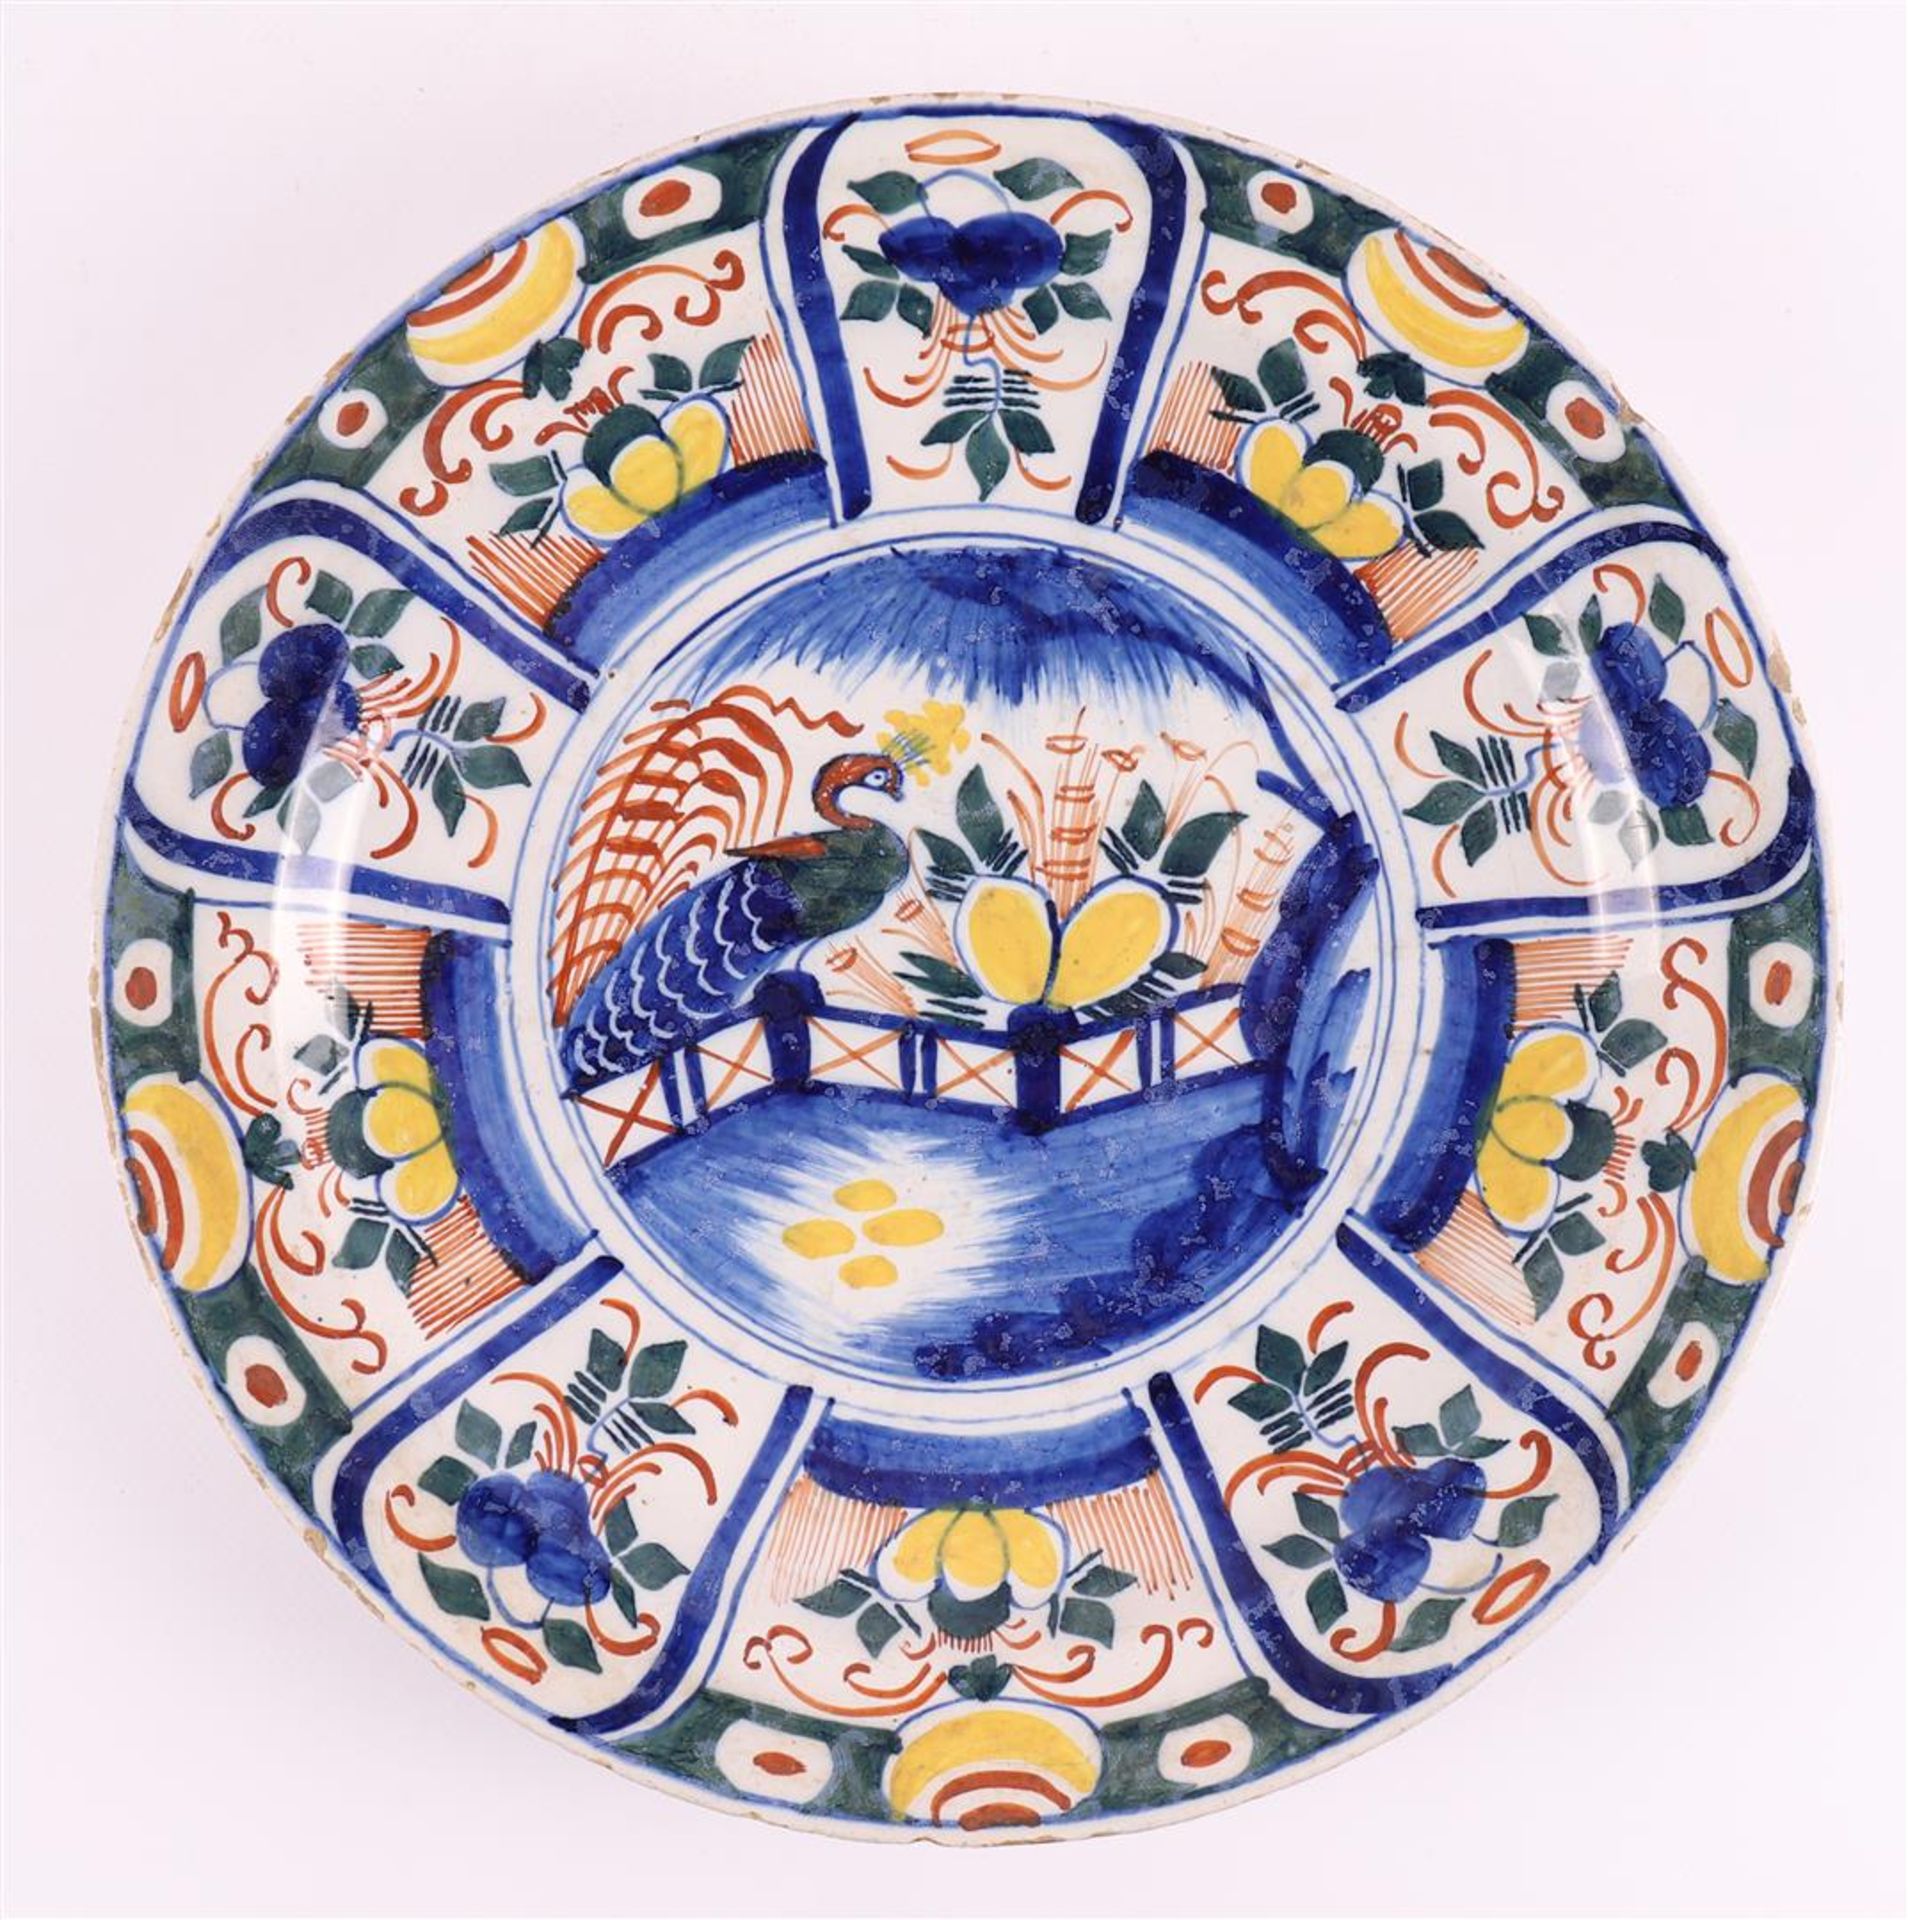 A polychrome Delft earthenware dish, 18th century. - Image 2 of 9